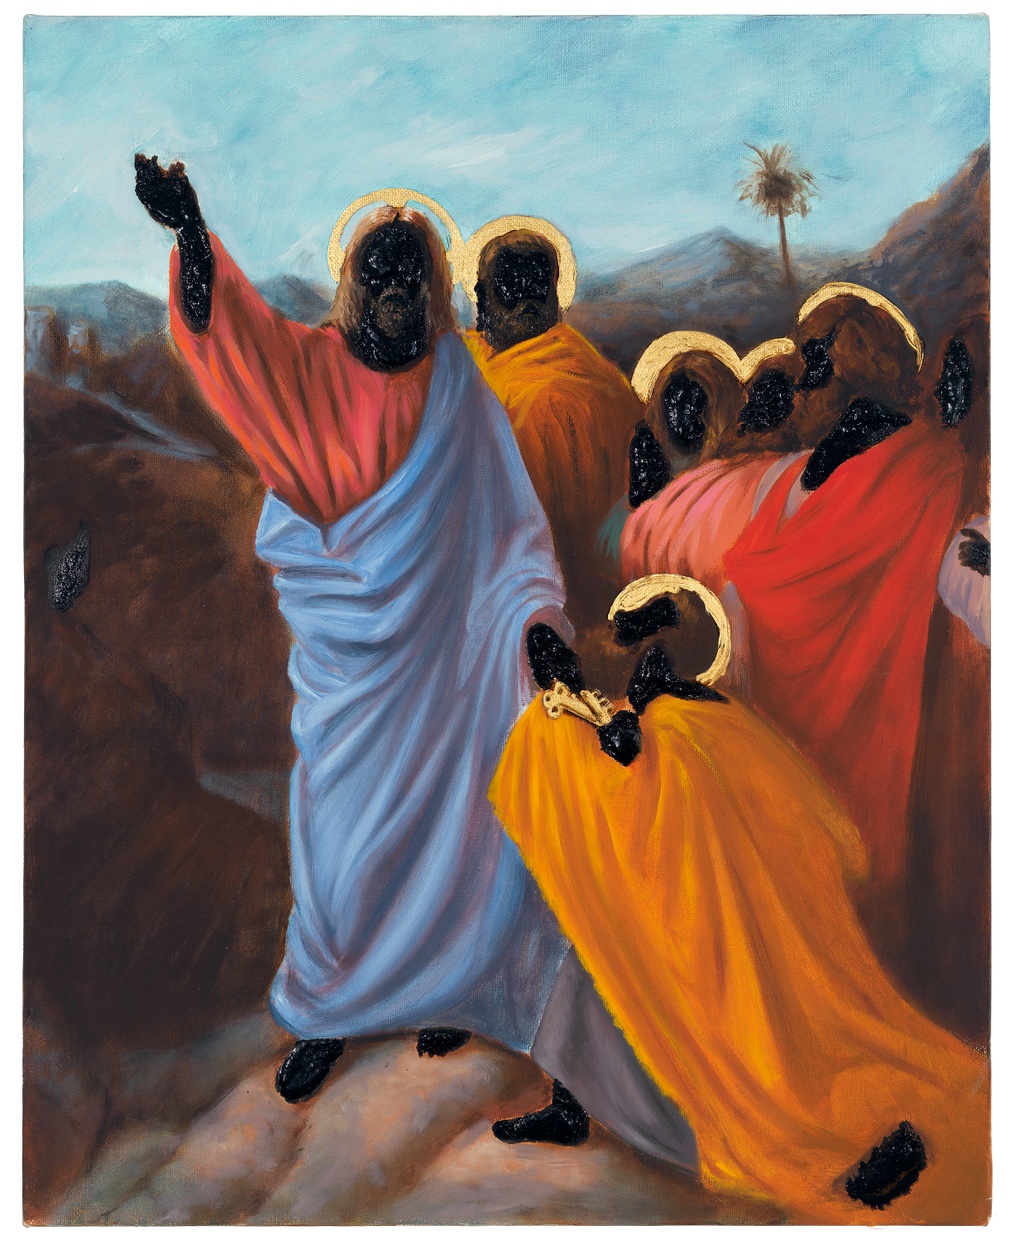 A painting of a group of golden-haloed men in robes gathered around a bearded man whose right hand is raised in the air and whose left is passing golden keys to a kneeling man. The skin of all of these men is covered in black tar.